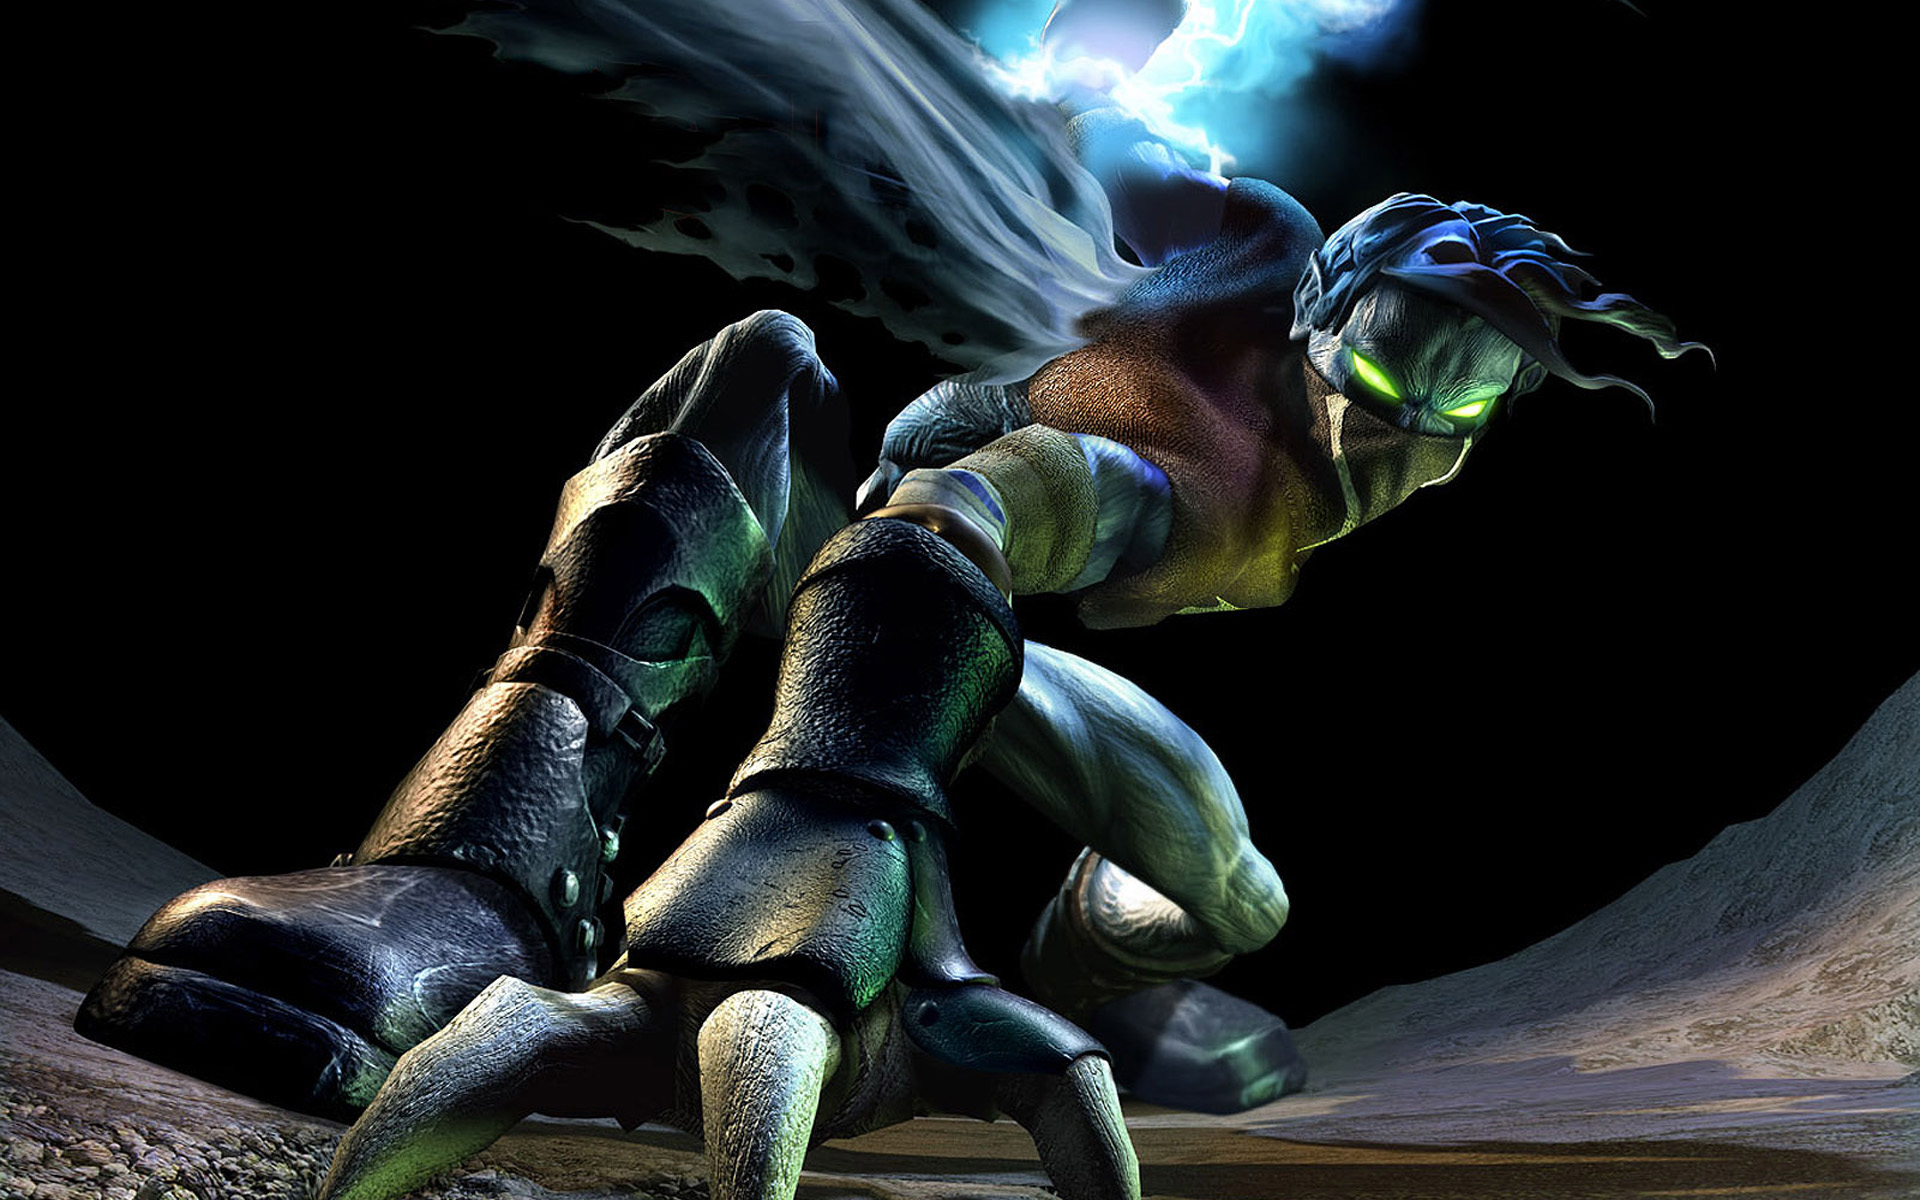 Legacy of kain on steam фото 27